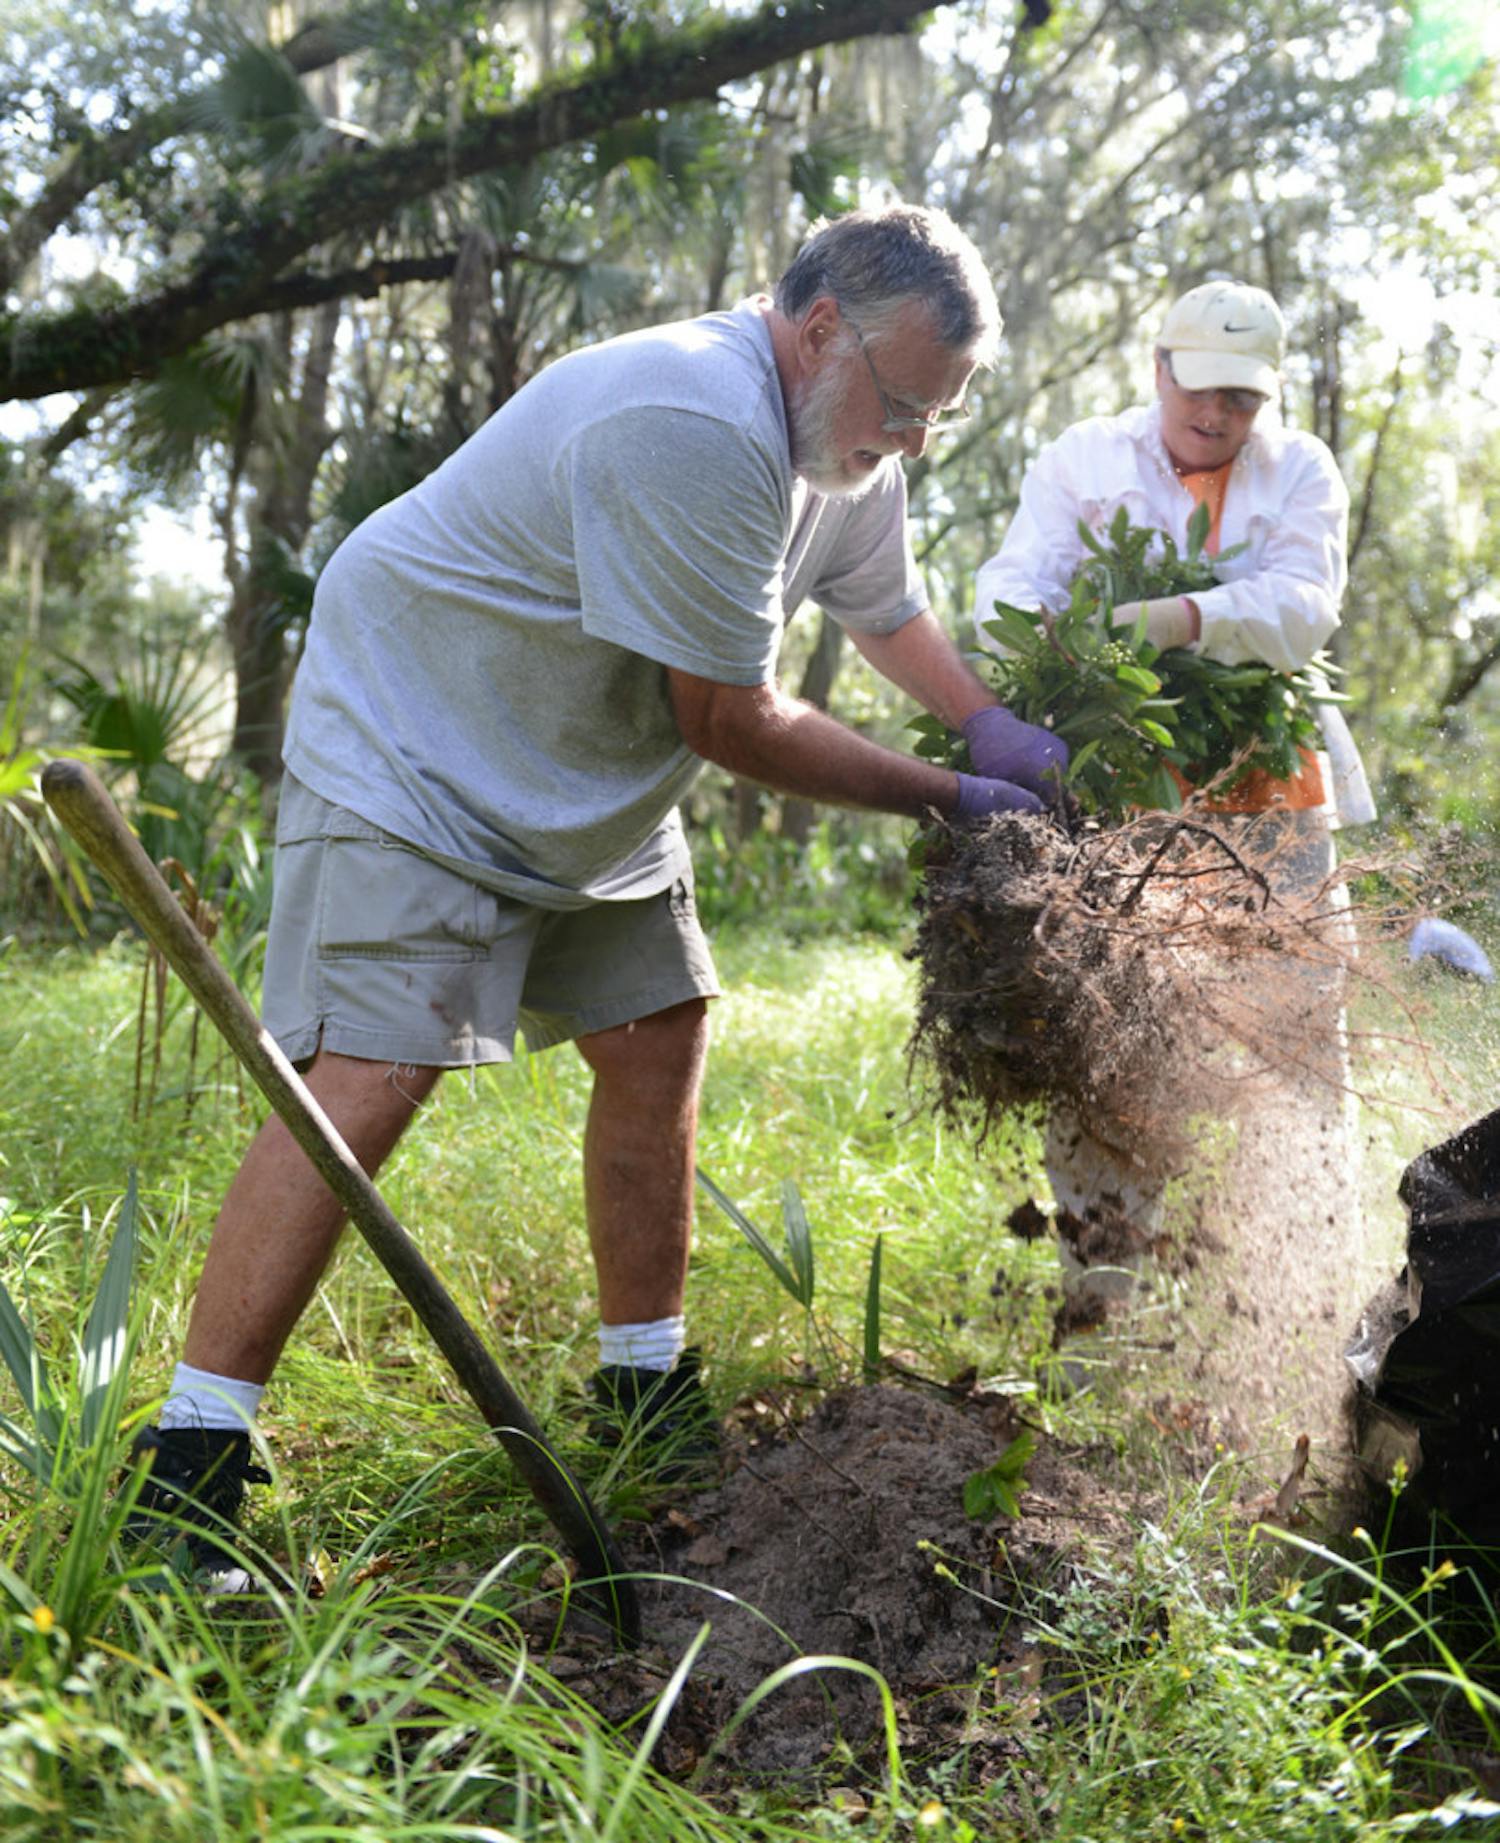 Patrick and Susan McCoy, of Fernandina Beach, Fla., uproot coral ardisia at Paynes Prairie Preserve State Park on Saturday. The McCoys joined their son and other volunteers to aid in the removal of the invasive exotic plant in honor of National Public Lands Day.